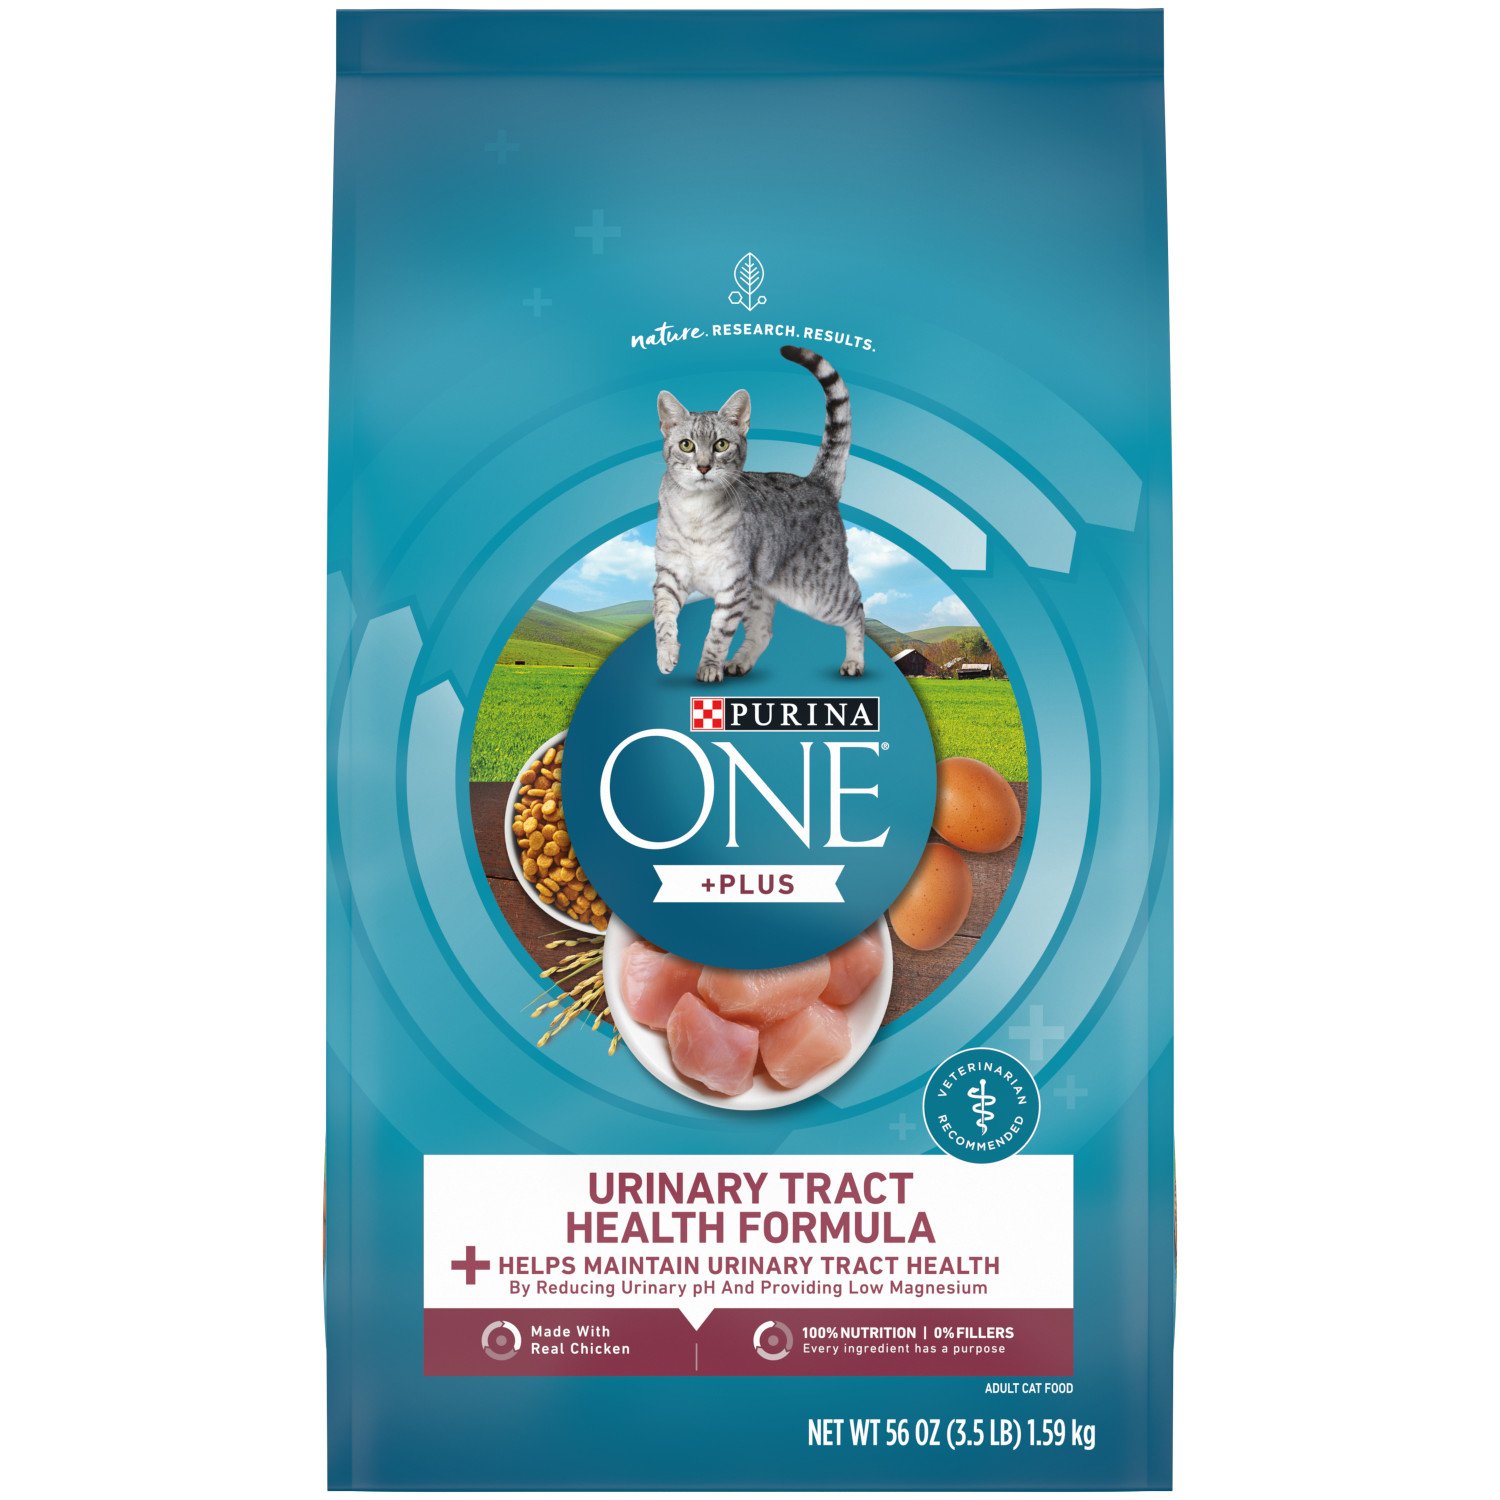 purina one special blend